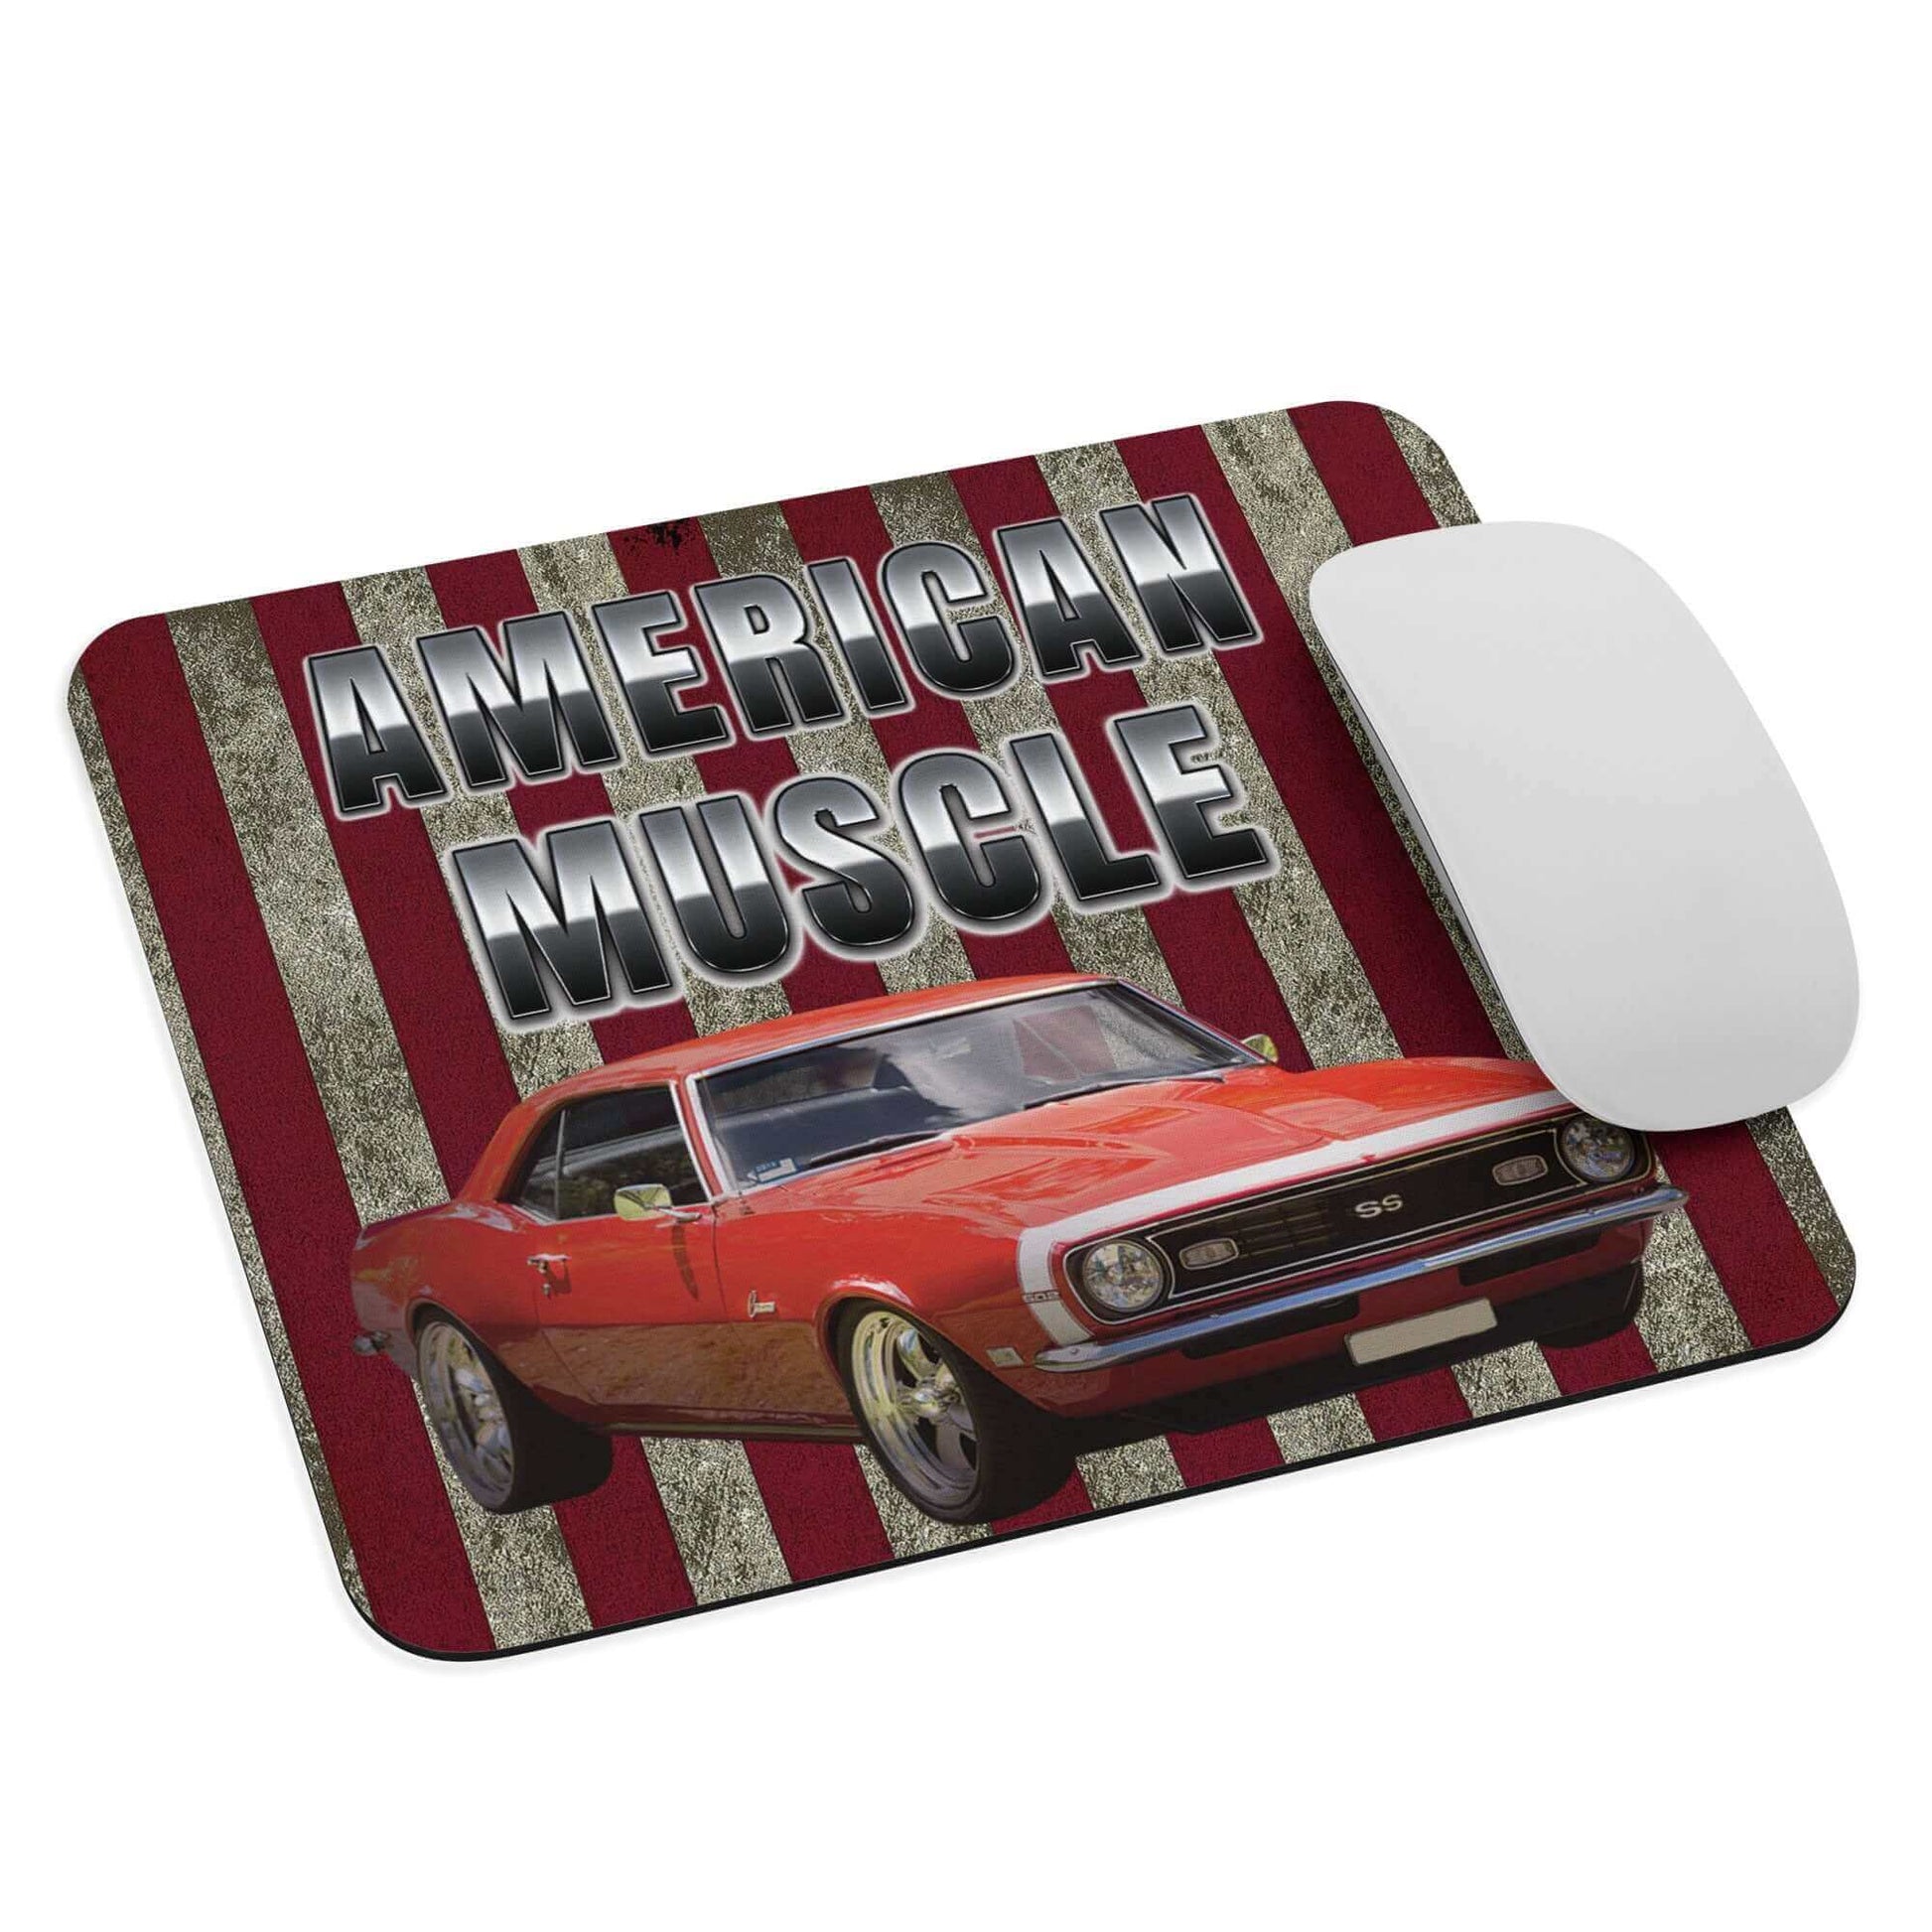 American Muscle - Chevy Corvette - Mouse pad - Horrible Designs